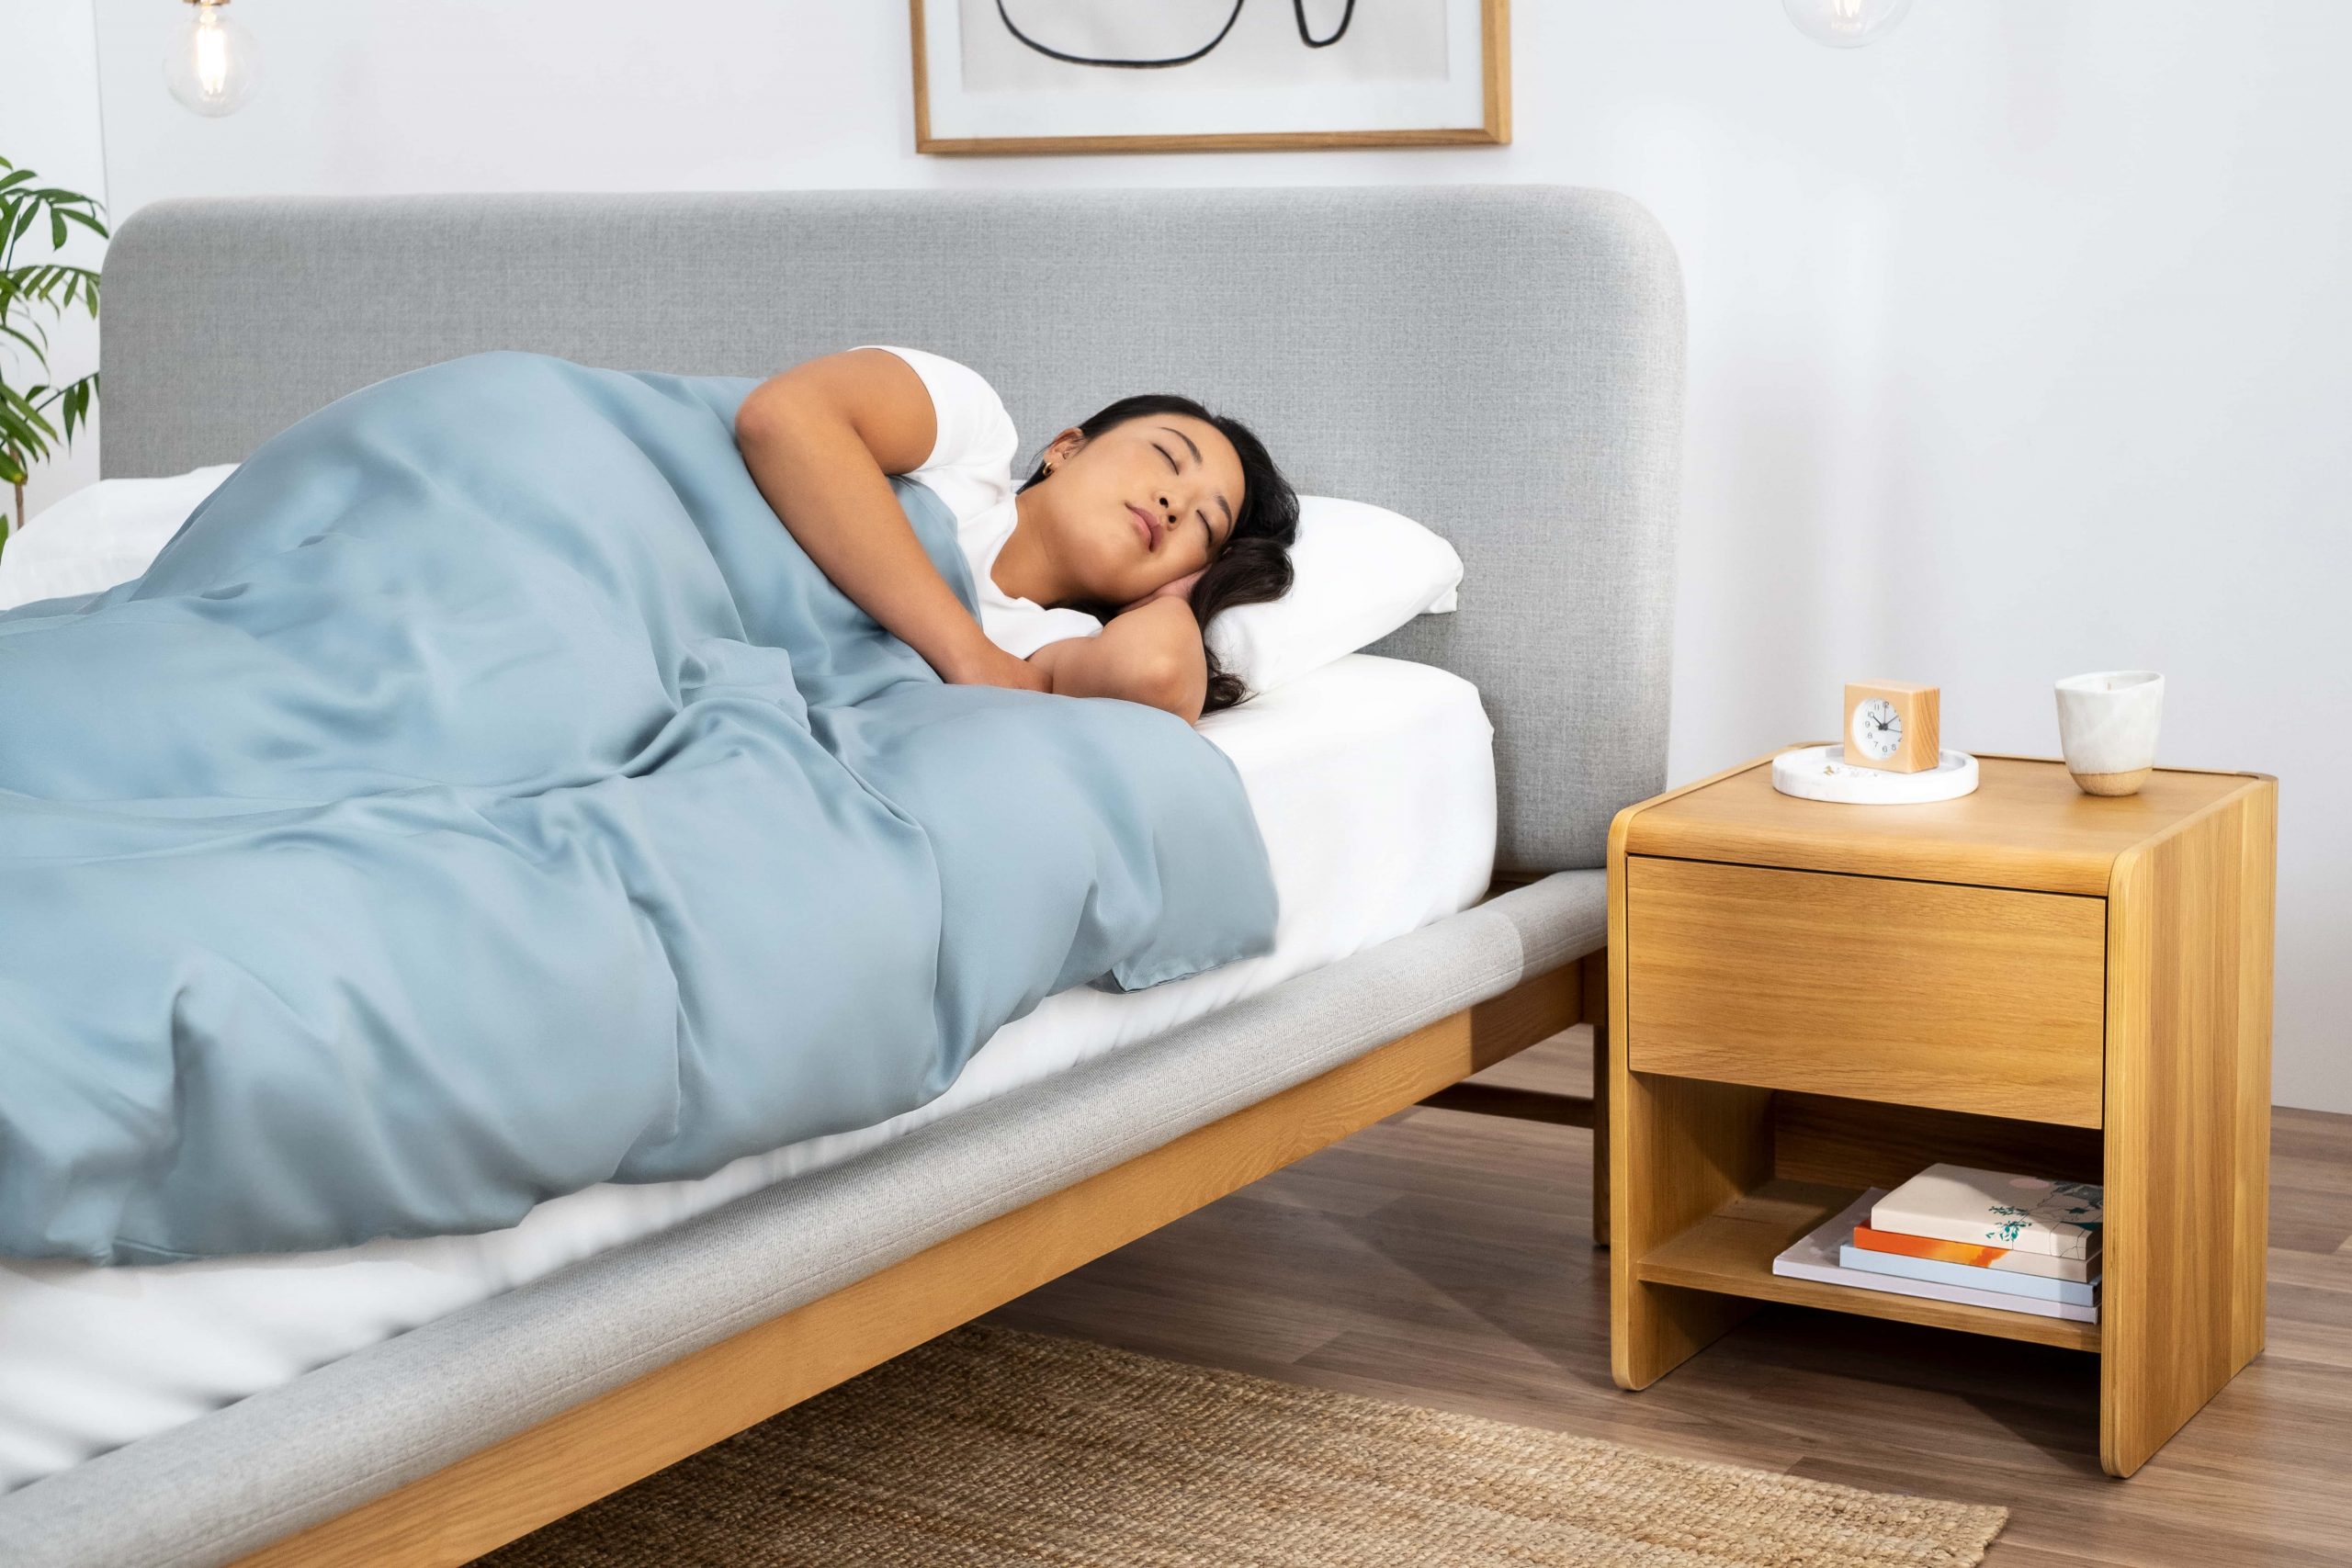 A woman sleeps soundly in her mid-century modern bedroom with Koala furniture